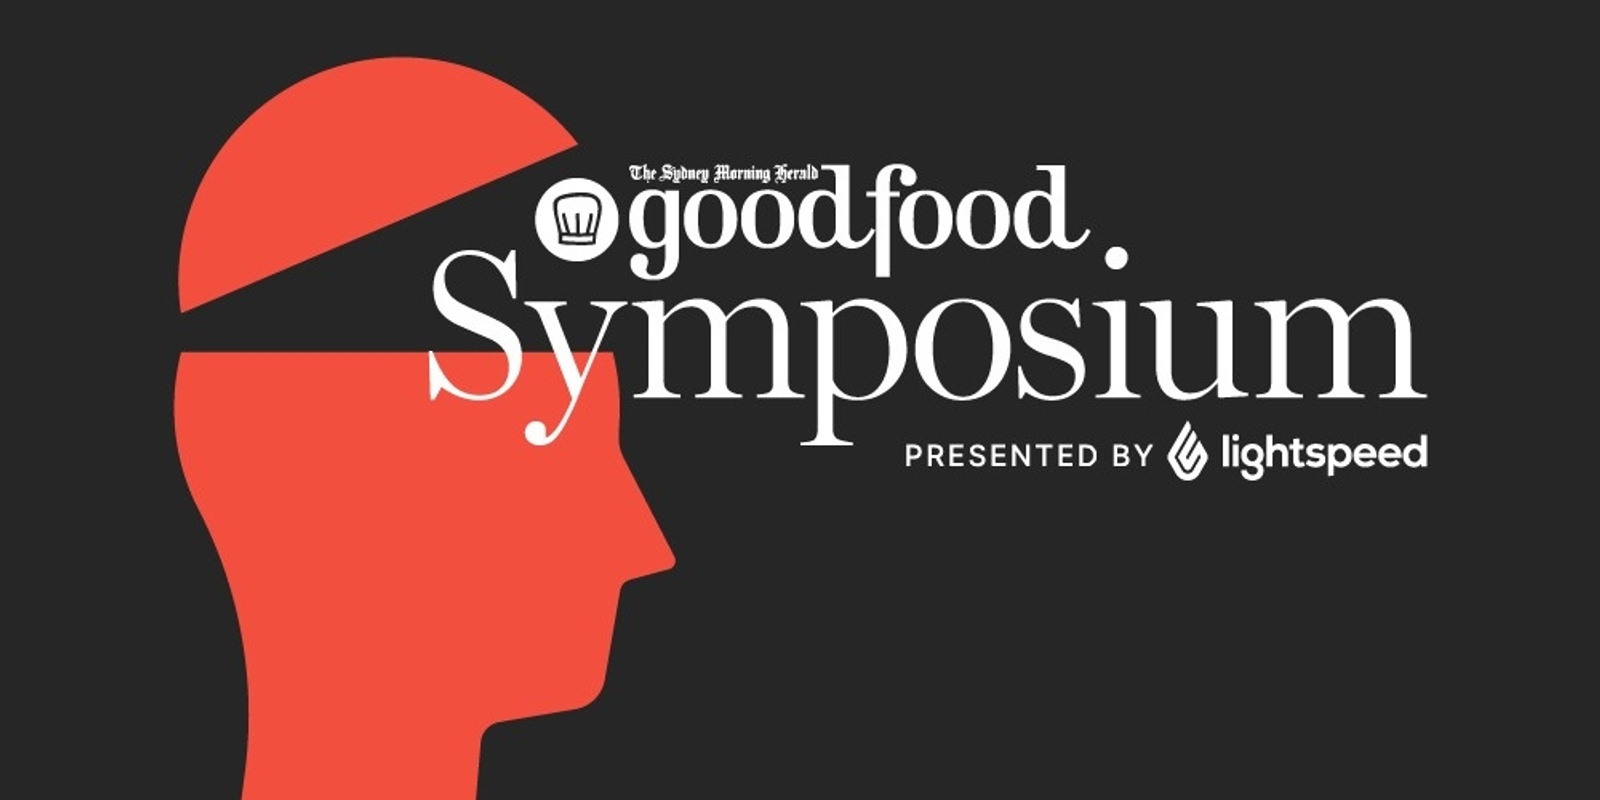 Banner image for The Sydney Morning Herald Good Food Symposium presented by Lightspeed